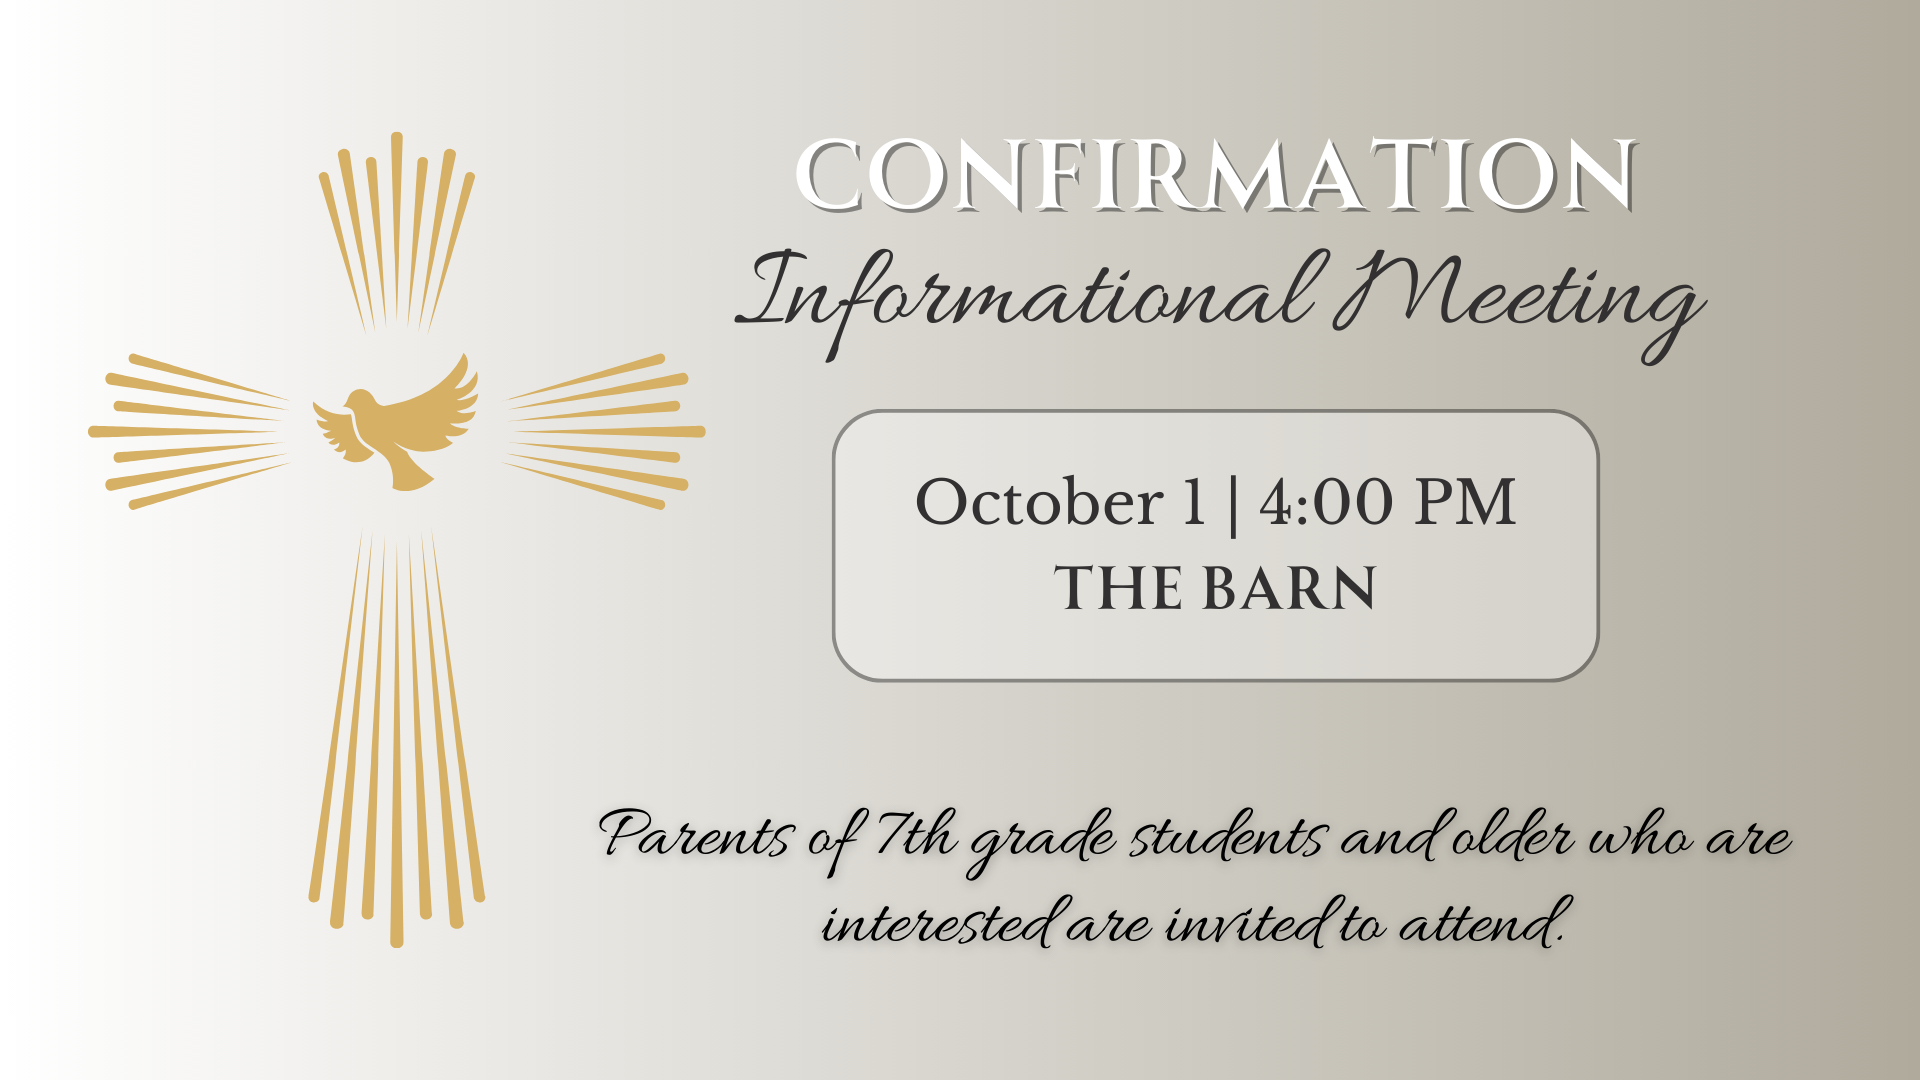 Confirmation Informational Meeting